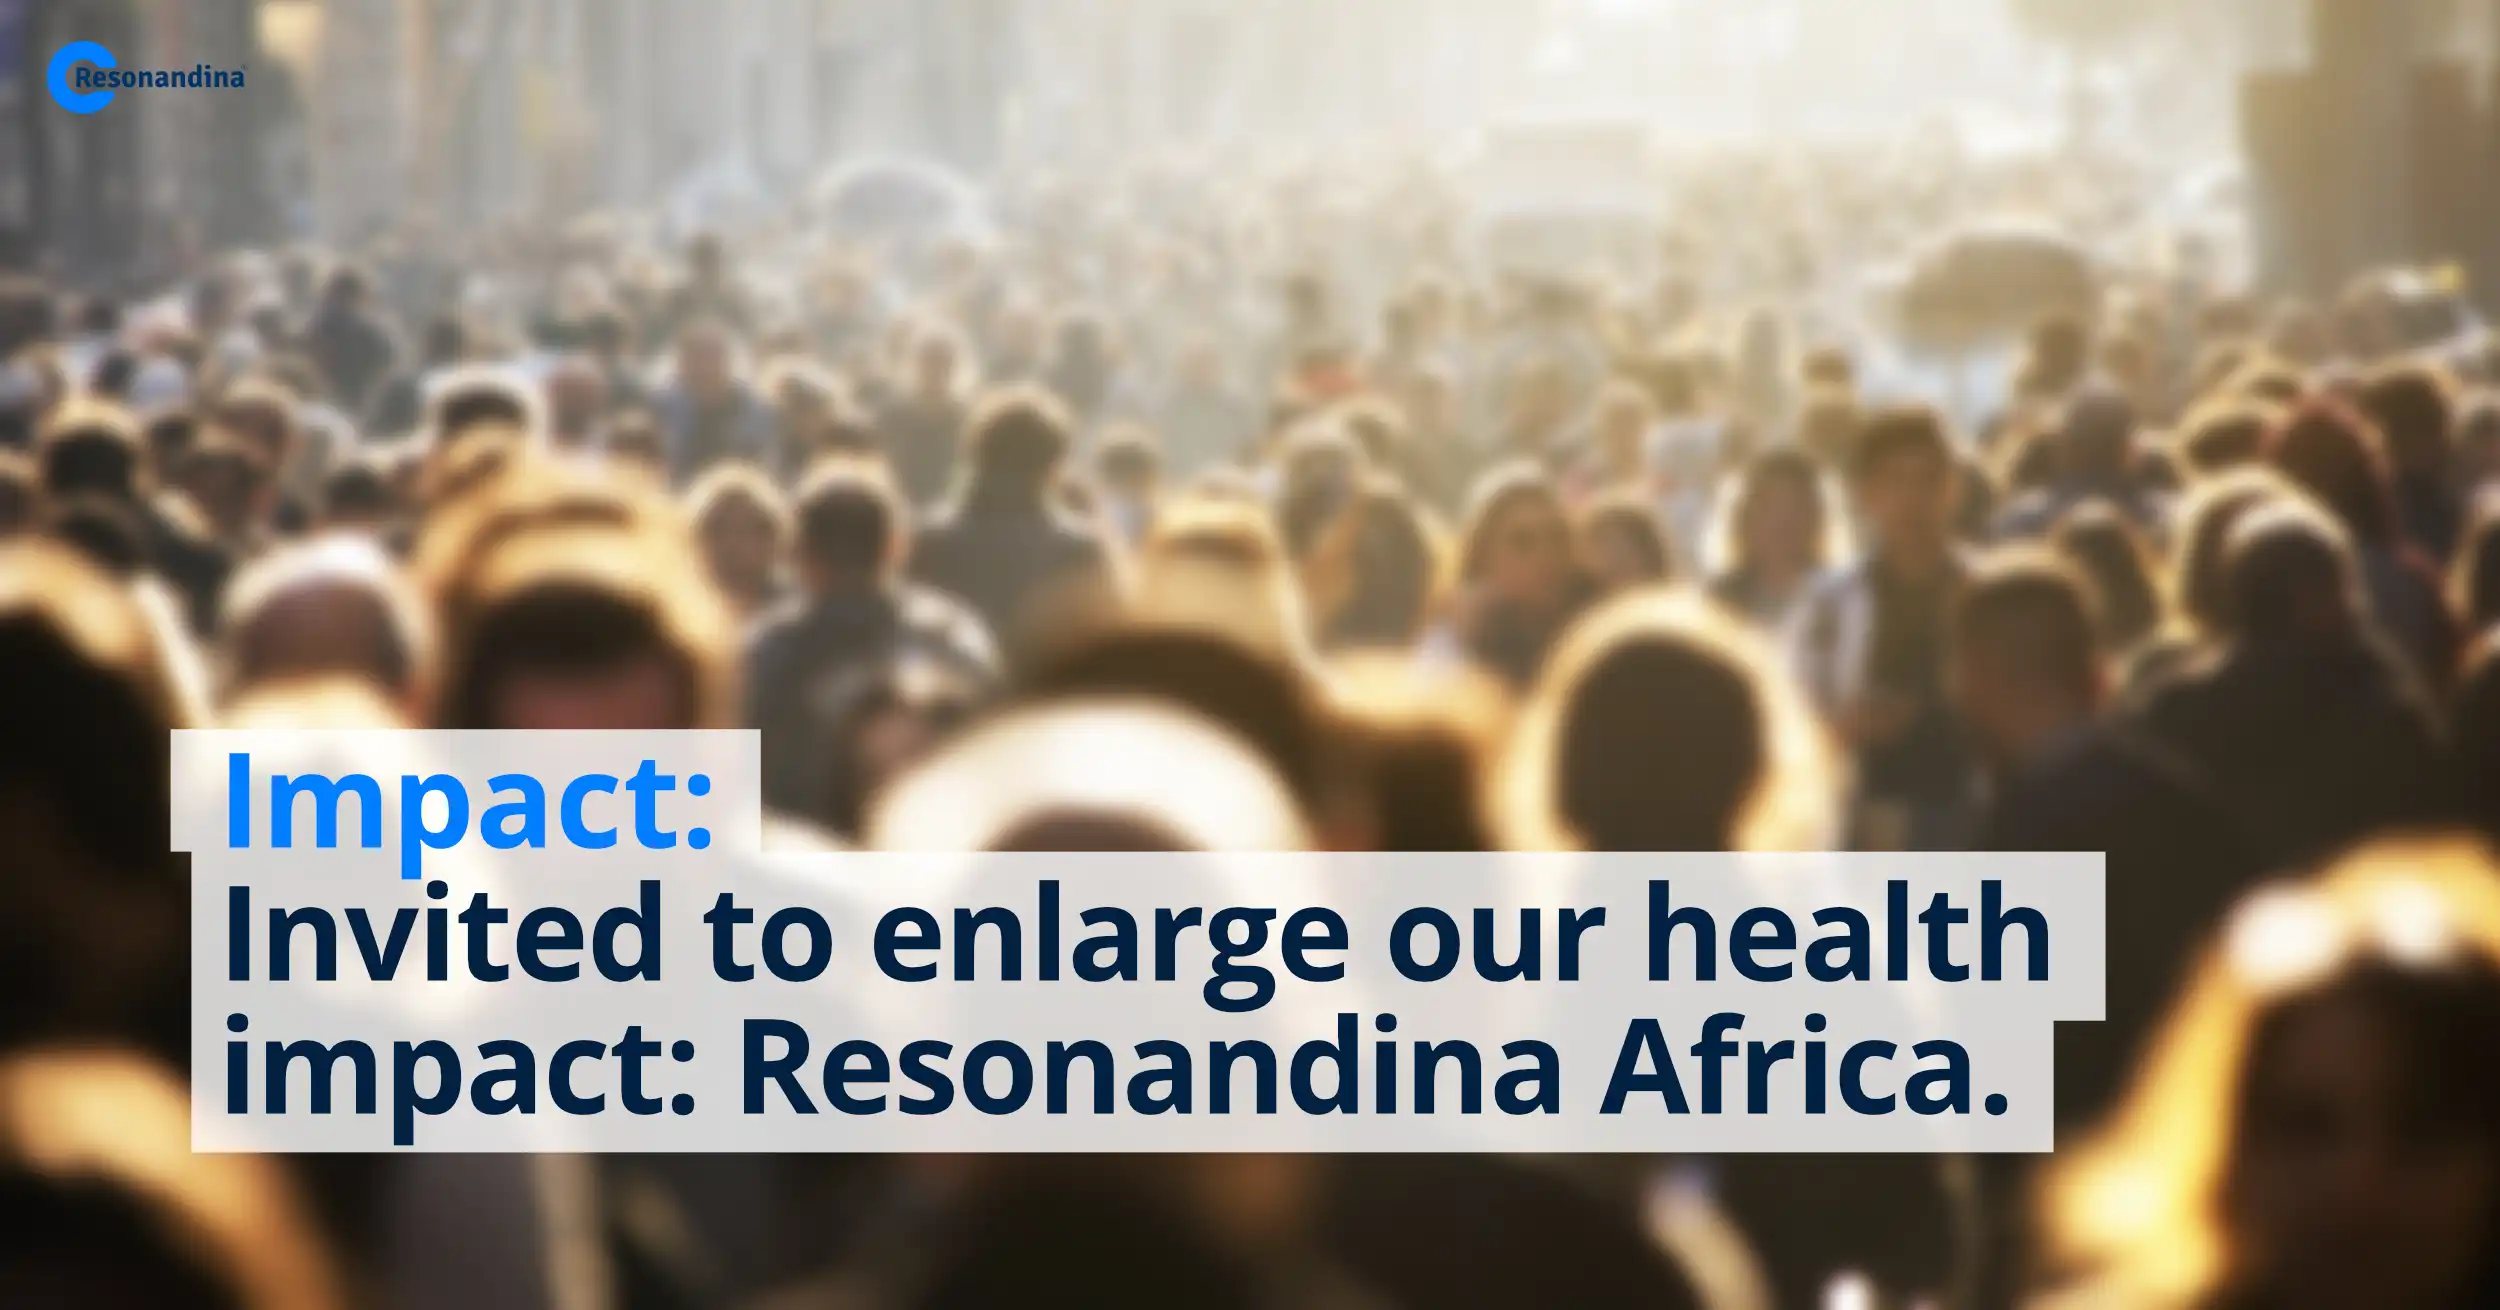 Street ful of people, resonandina new subsidiary in africa, enlarging our impact